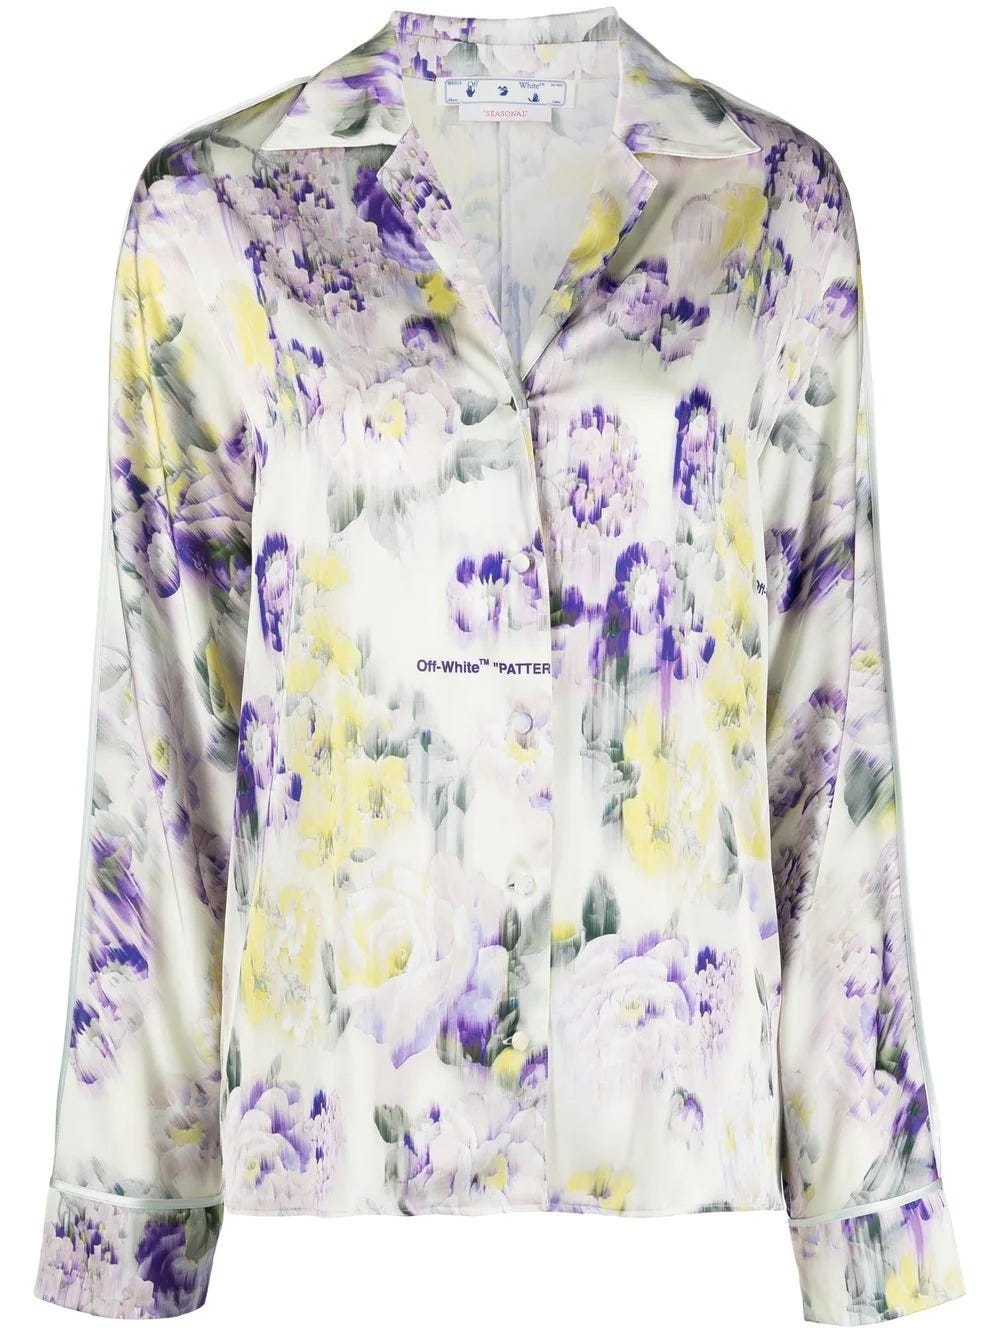 OFF-WHITE MULTICOLOURED SATIN SHIRT WITH FLORAL PRINT